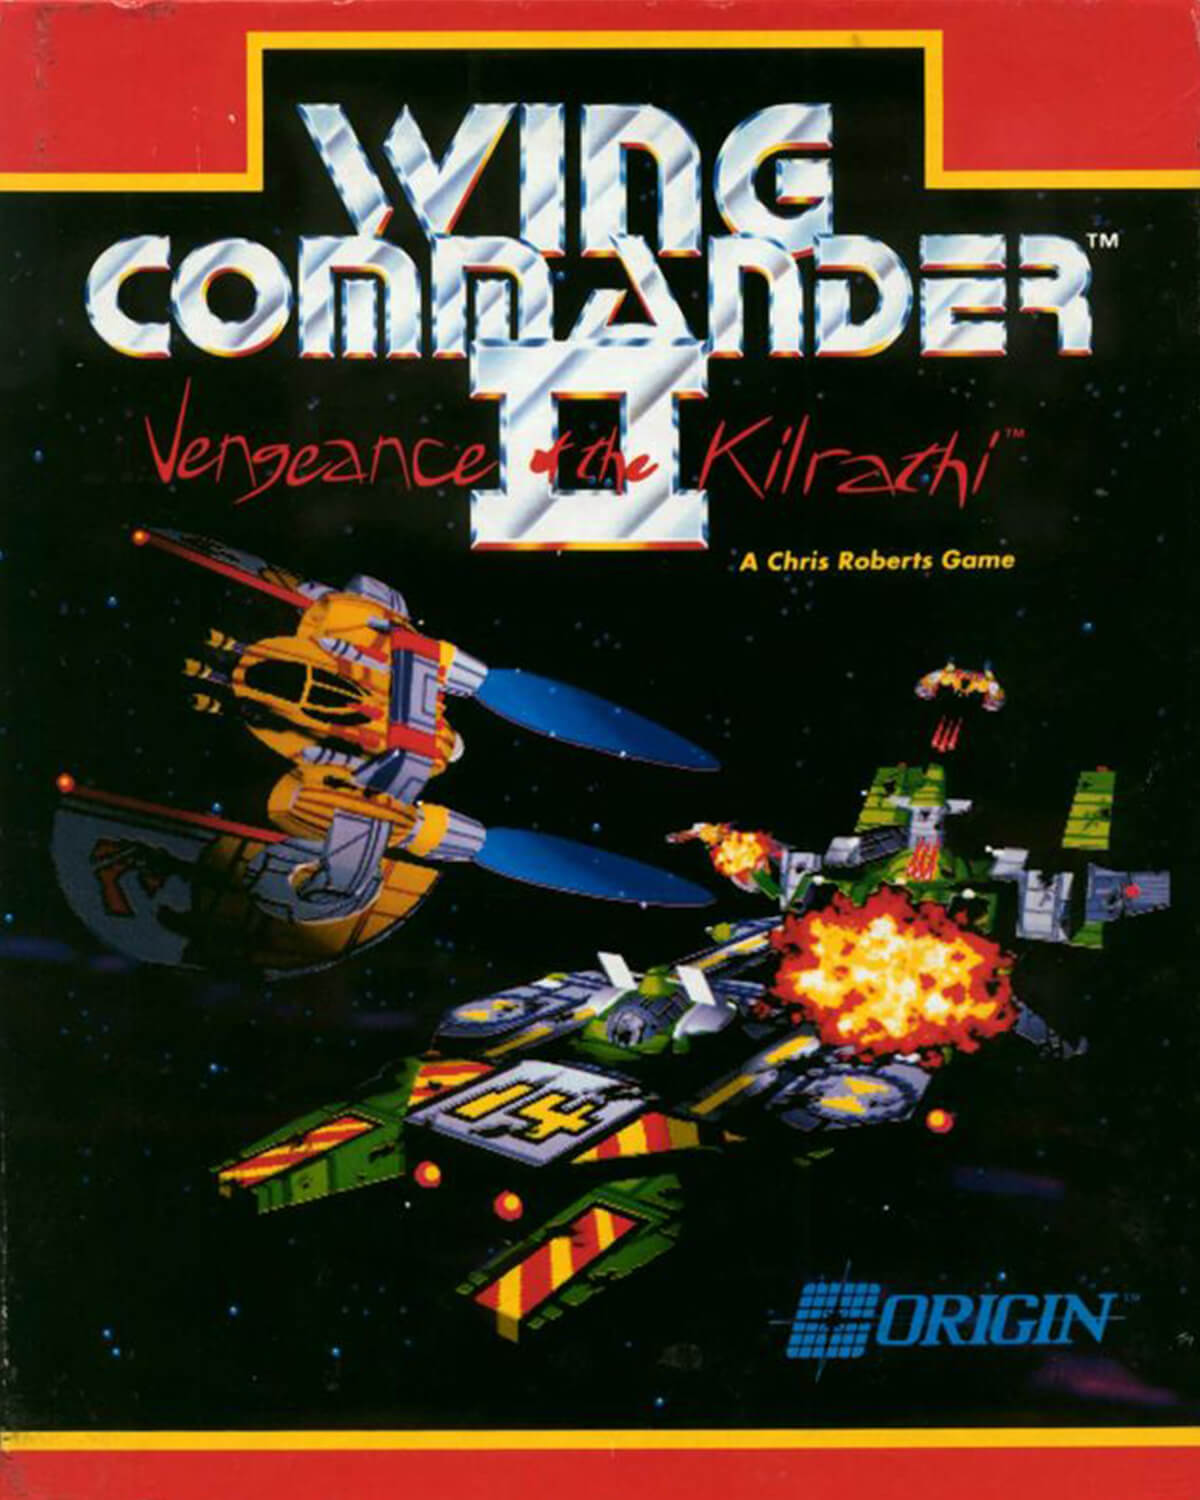 The box art for Wing Commander II: Vengeance of the Kilrathi, depicting two spaceships.